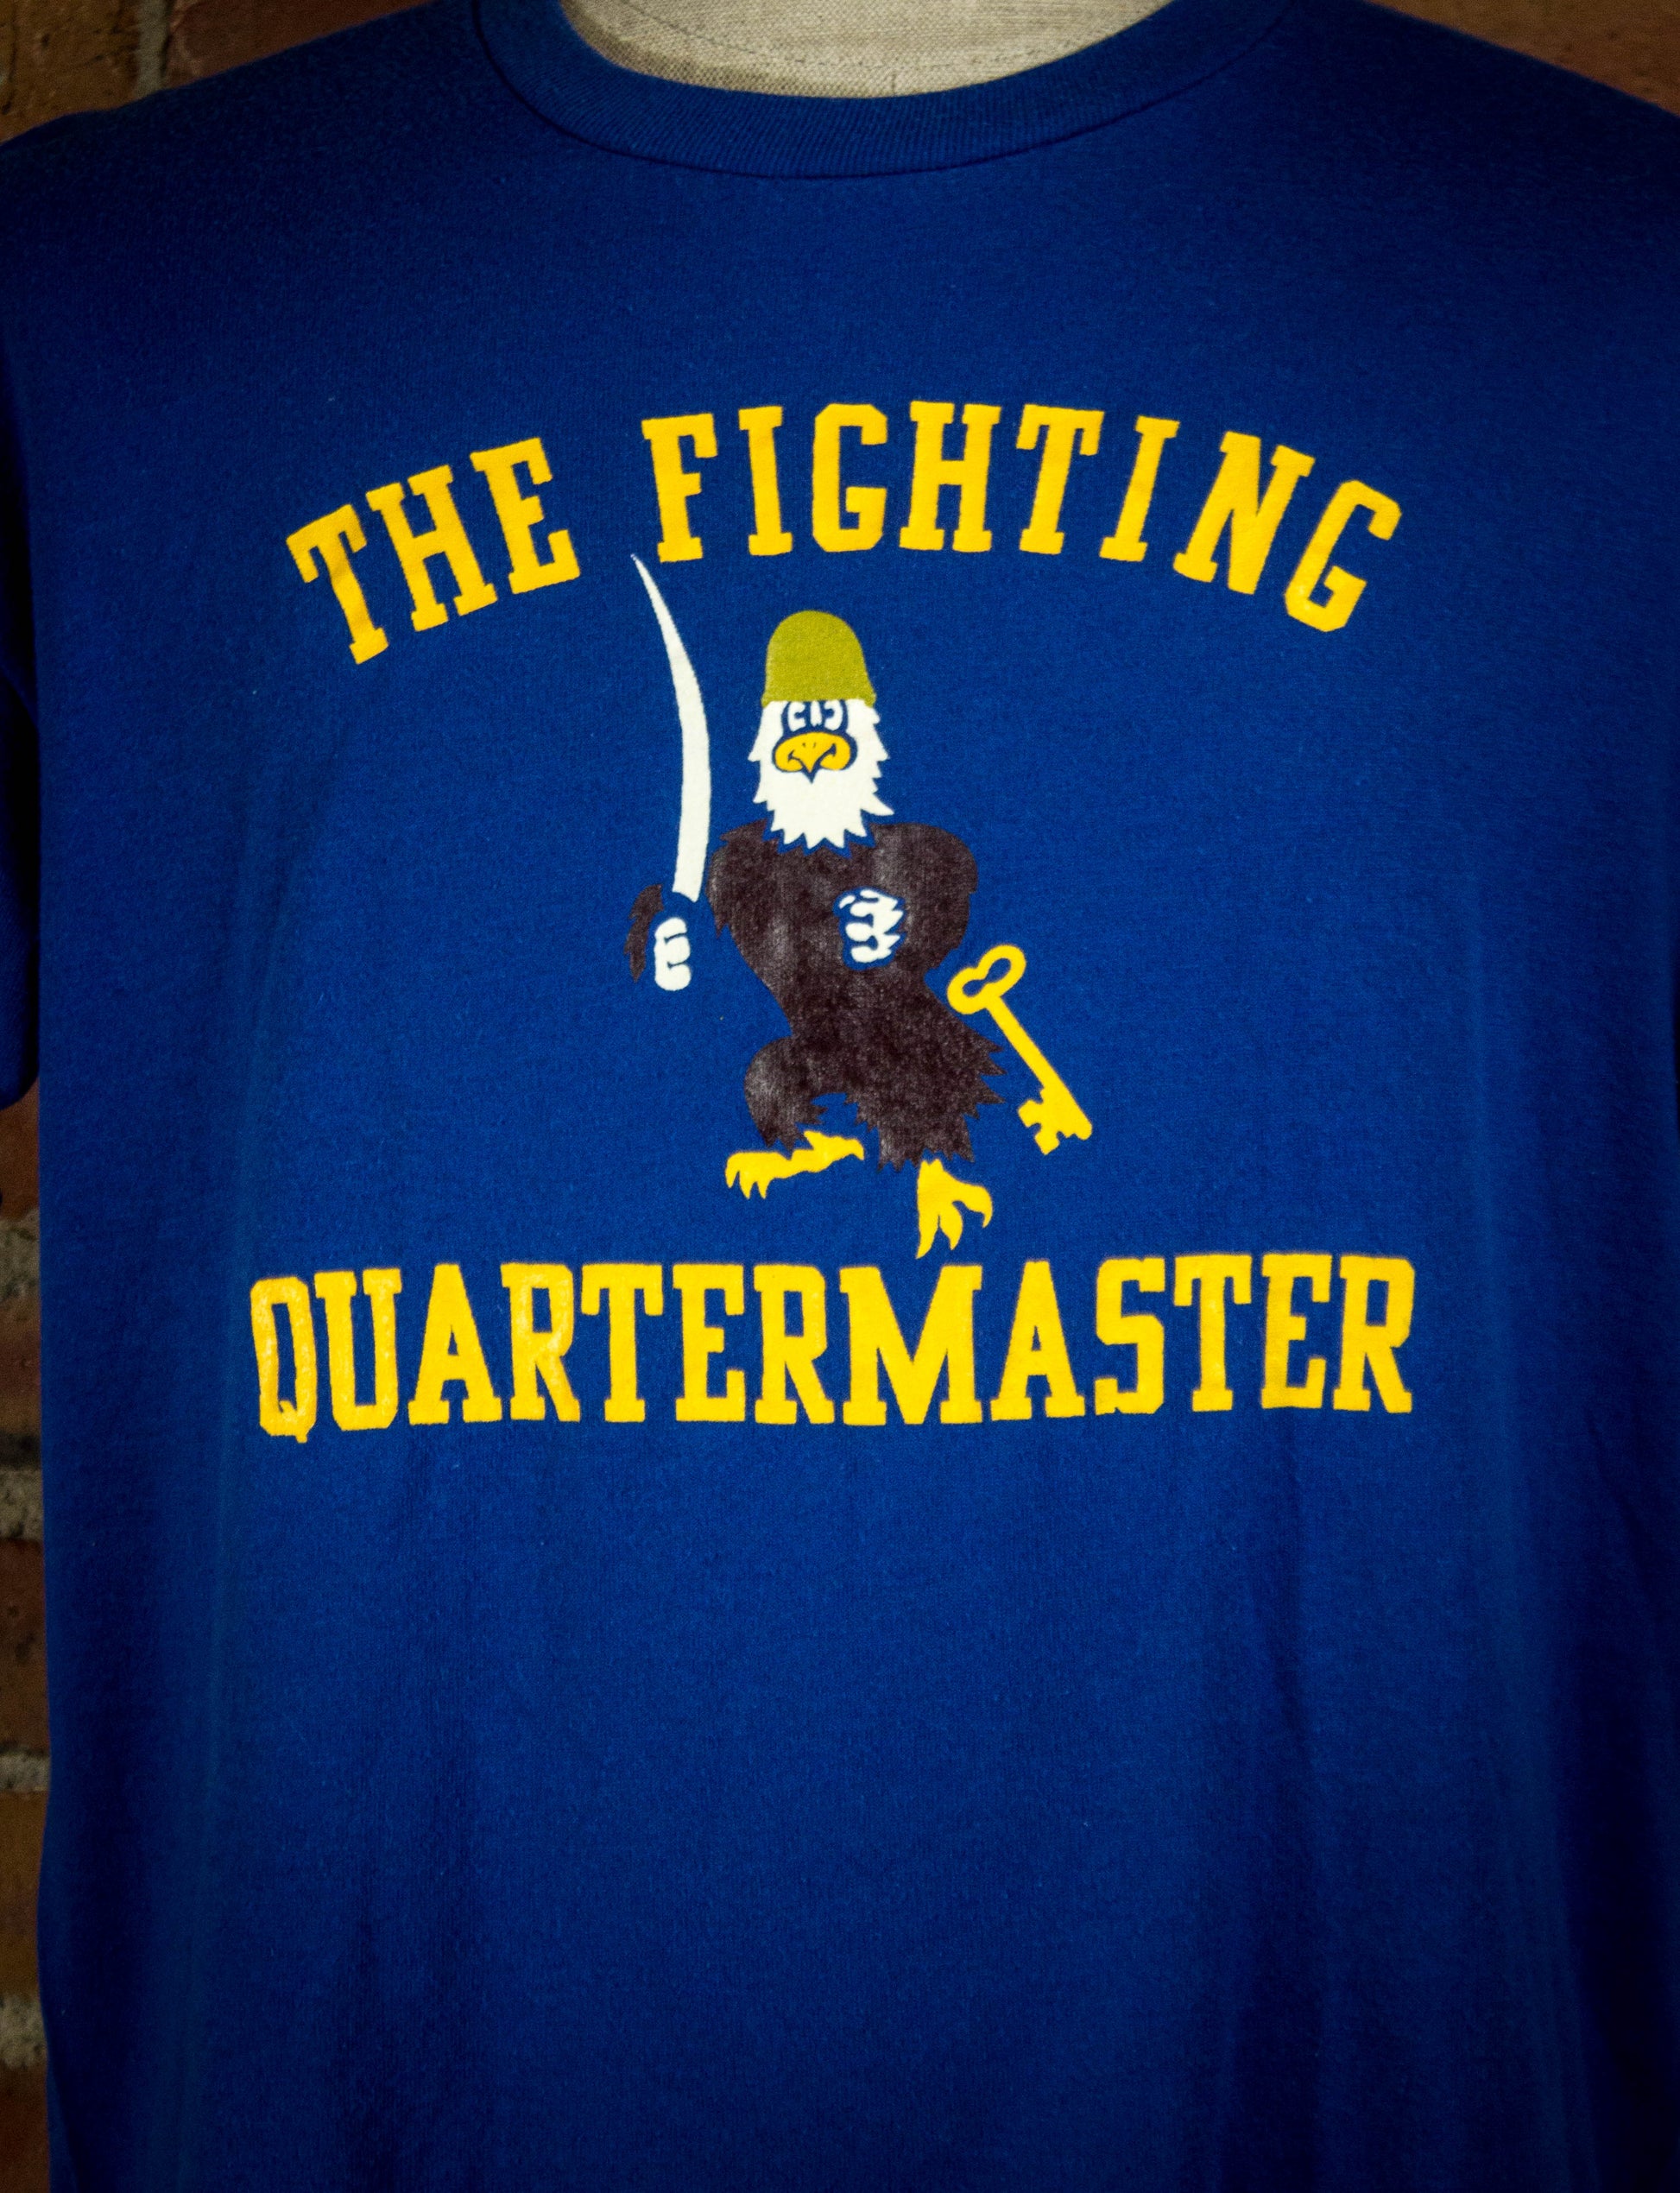 Vintage 80s The Fighting Quartermaster Military T Shirt Large